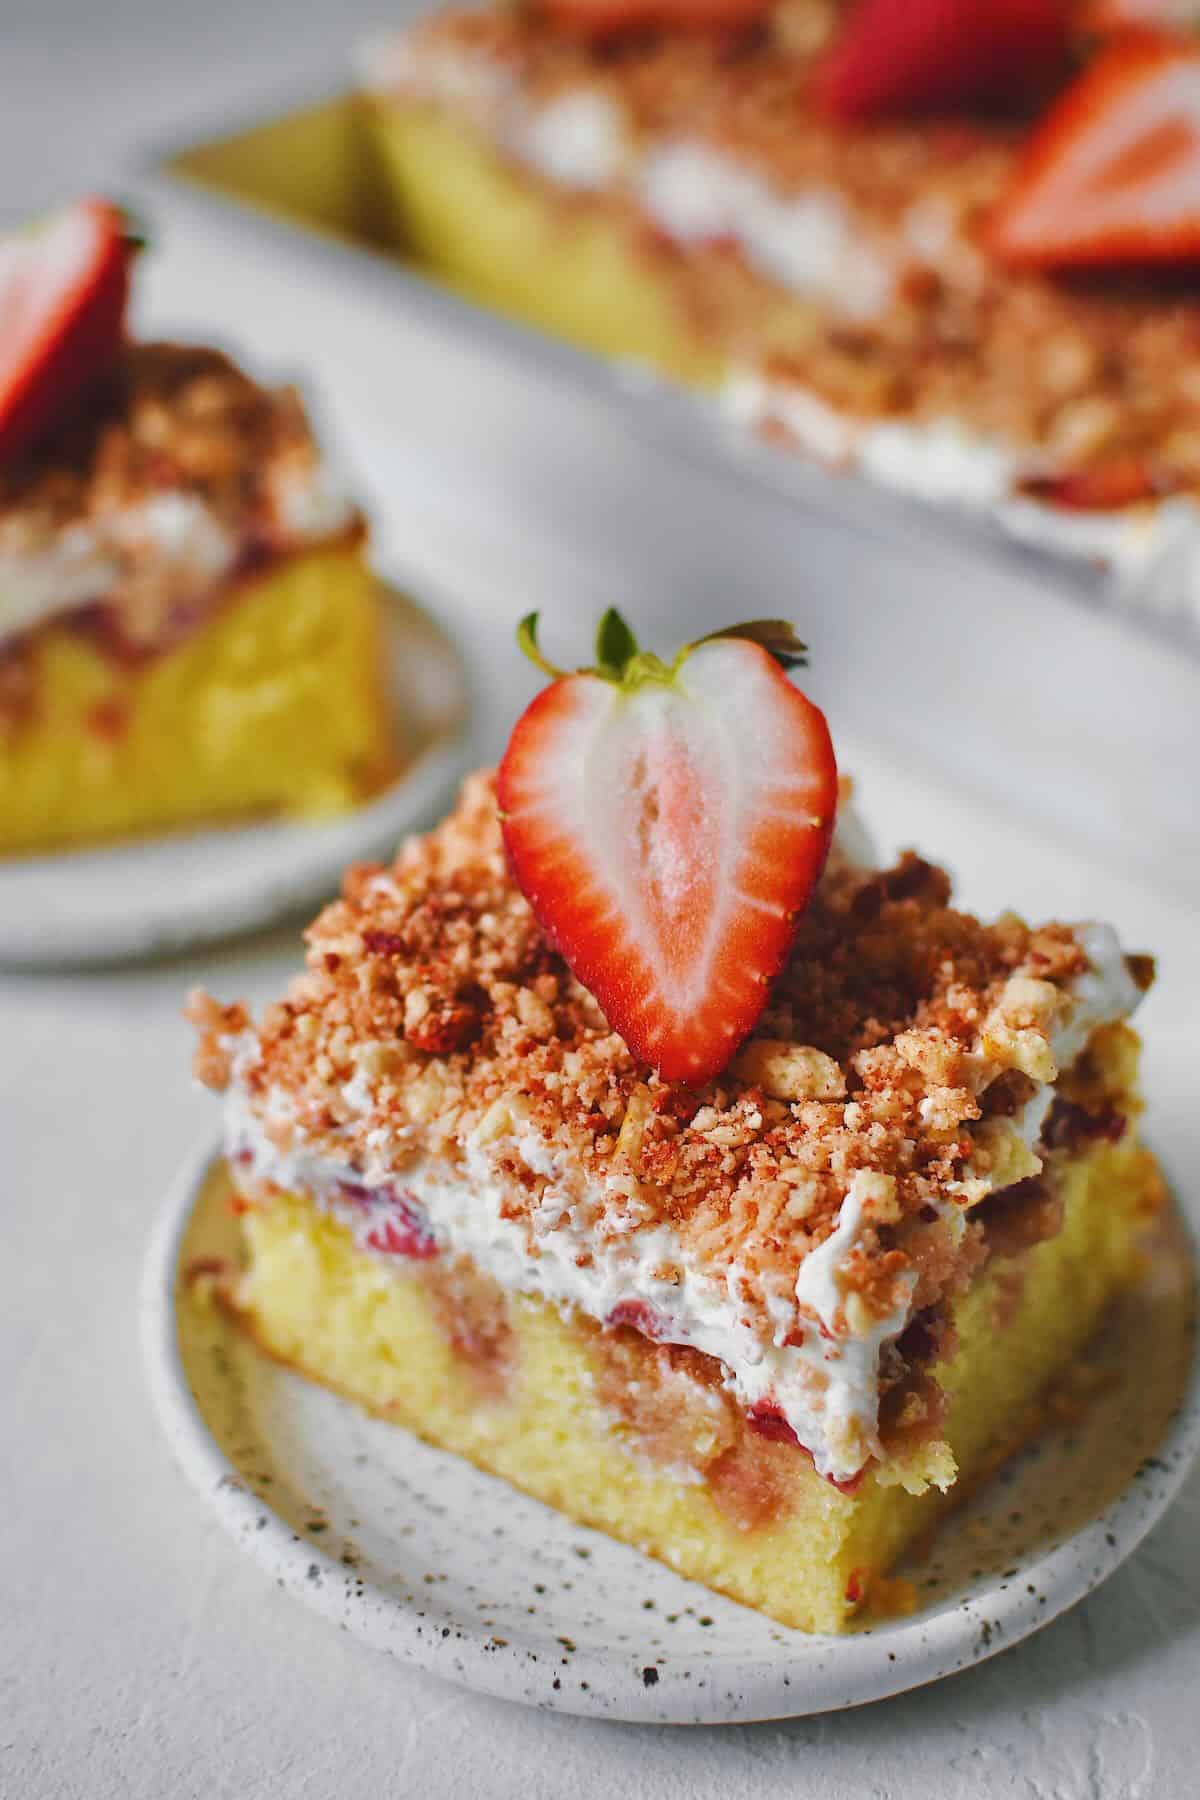 A couple slices of Strawberry Crunch Cake removed from the pan with a fresh strawberry half on top.